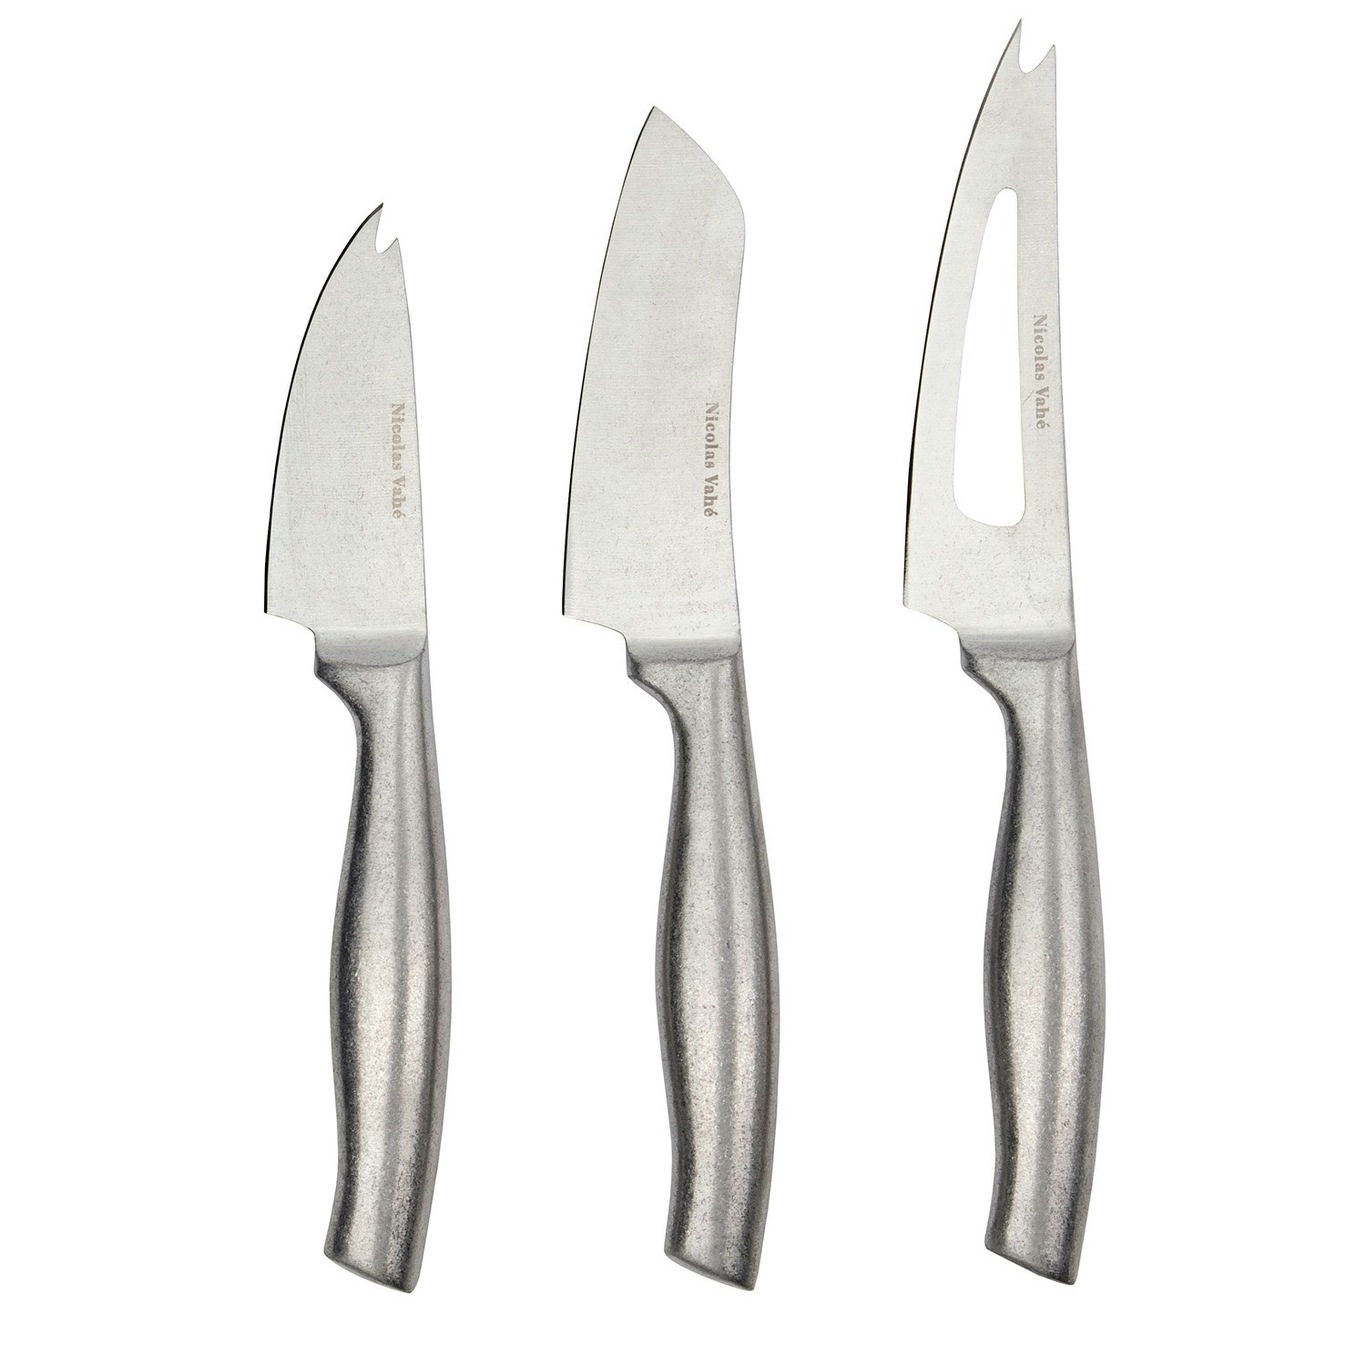 https://royaldesign.com/image/2/nicolas-vahe-fromage-cheese-knives-3-parts-0?w=800&quality=80